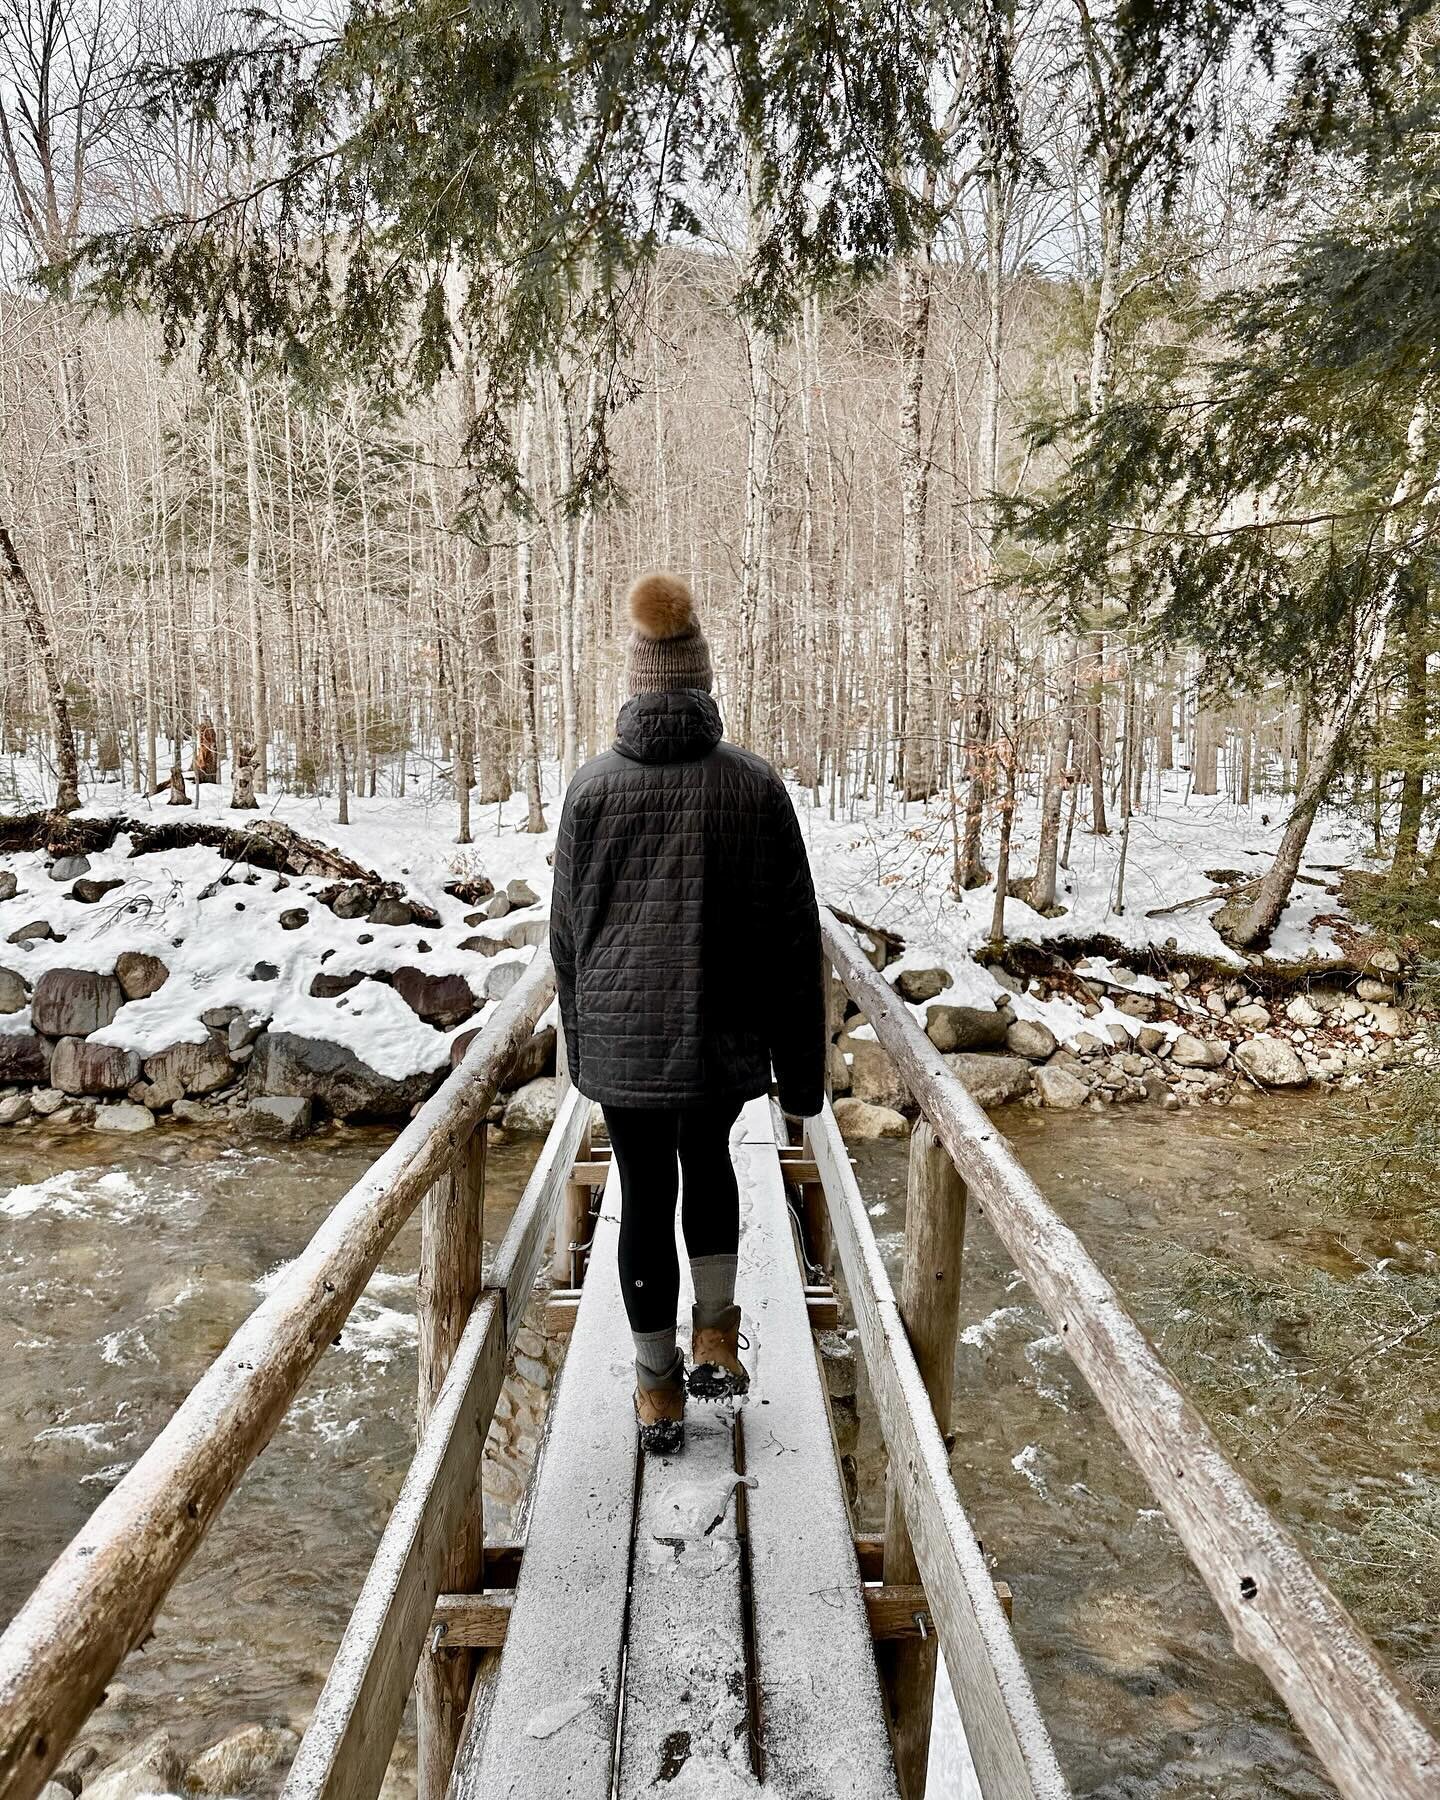 ❄️ Going Inward: Embracing Winter 

Today I wrote about learning from nature to live seasonally. 

Winter in NY can be tough, and I made a little list in the notes app of my phone a couple years ago to help remind me how to embrace to joys of winter 